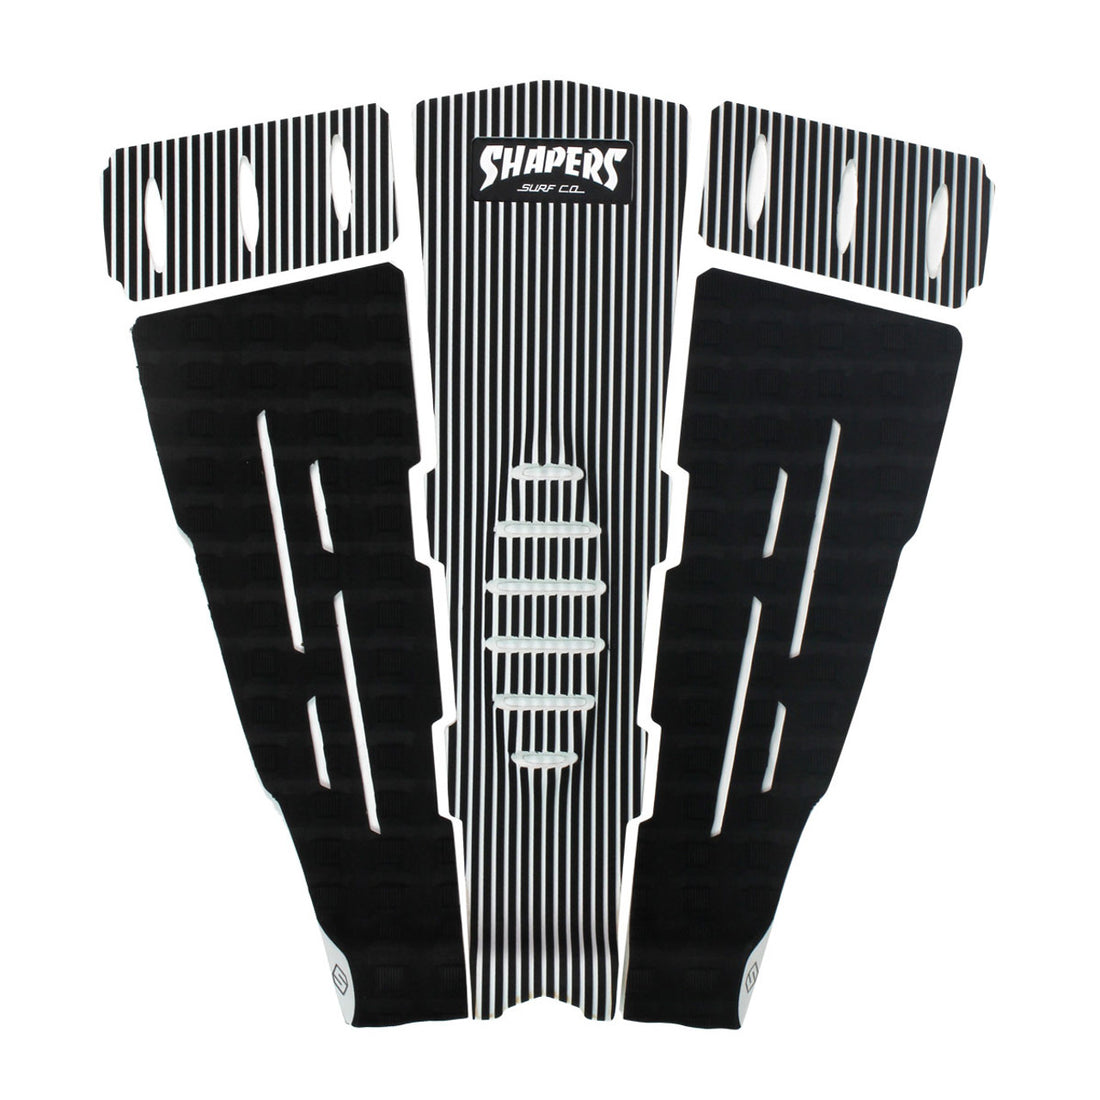 SHAPERS THE SHAPER TRACTION BLACK WHITE